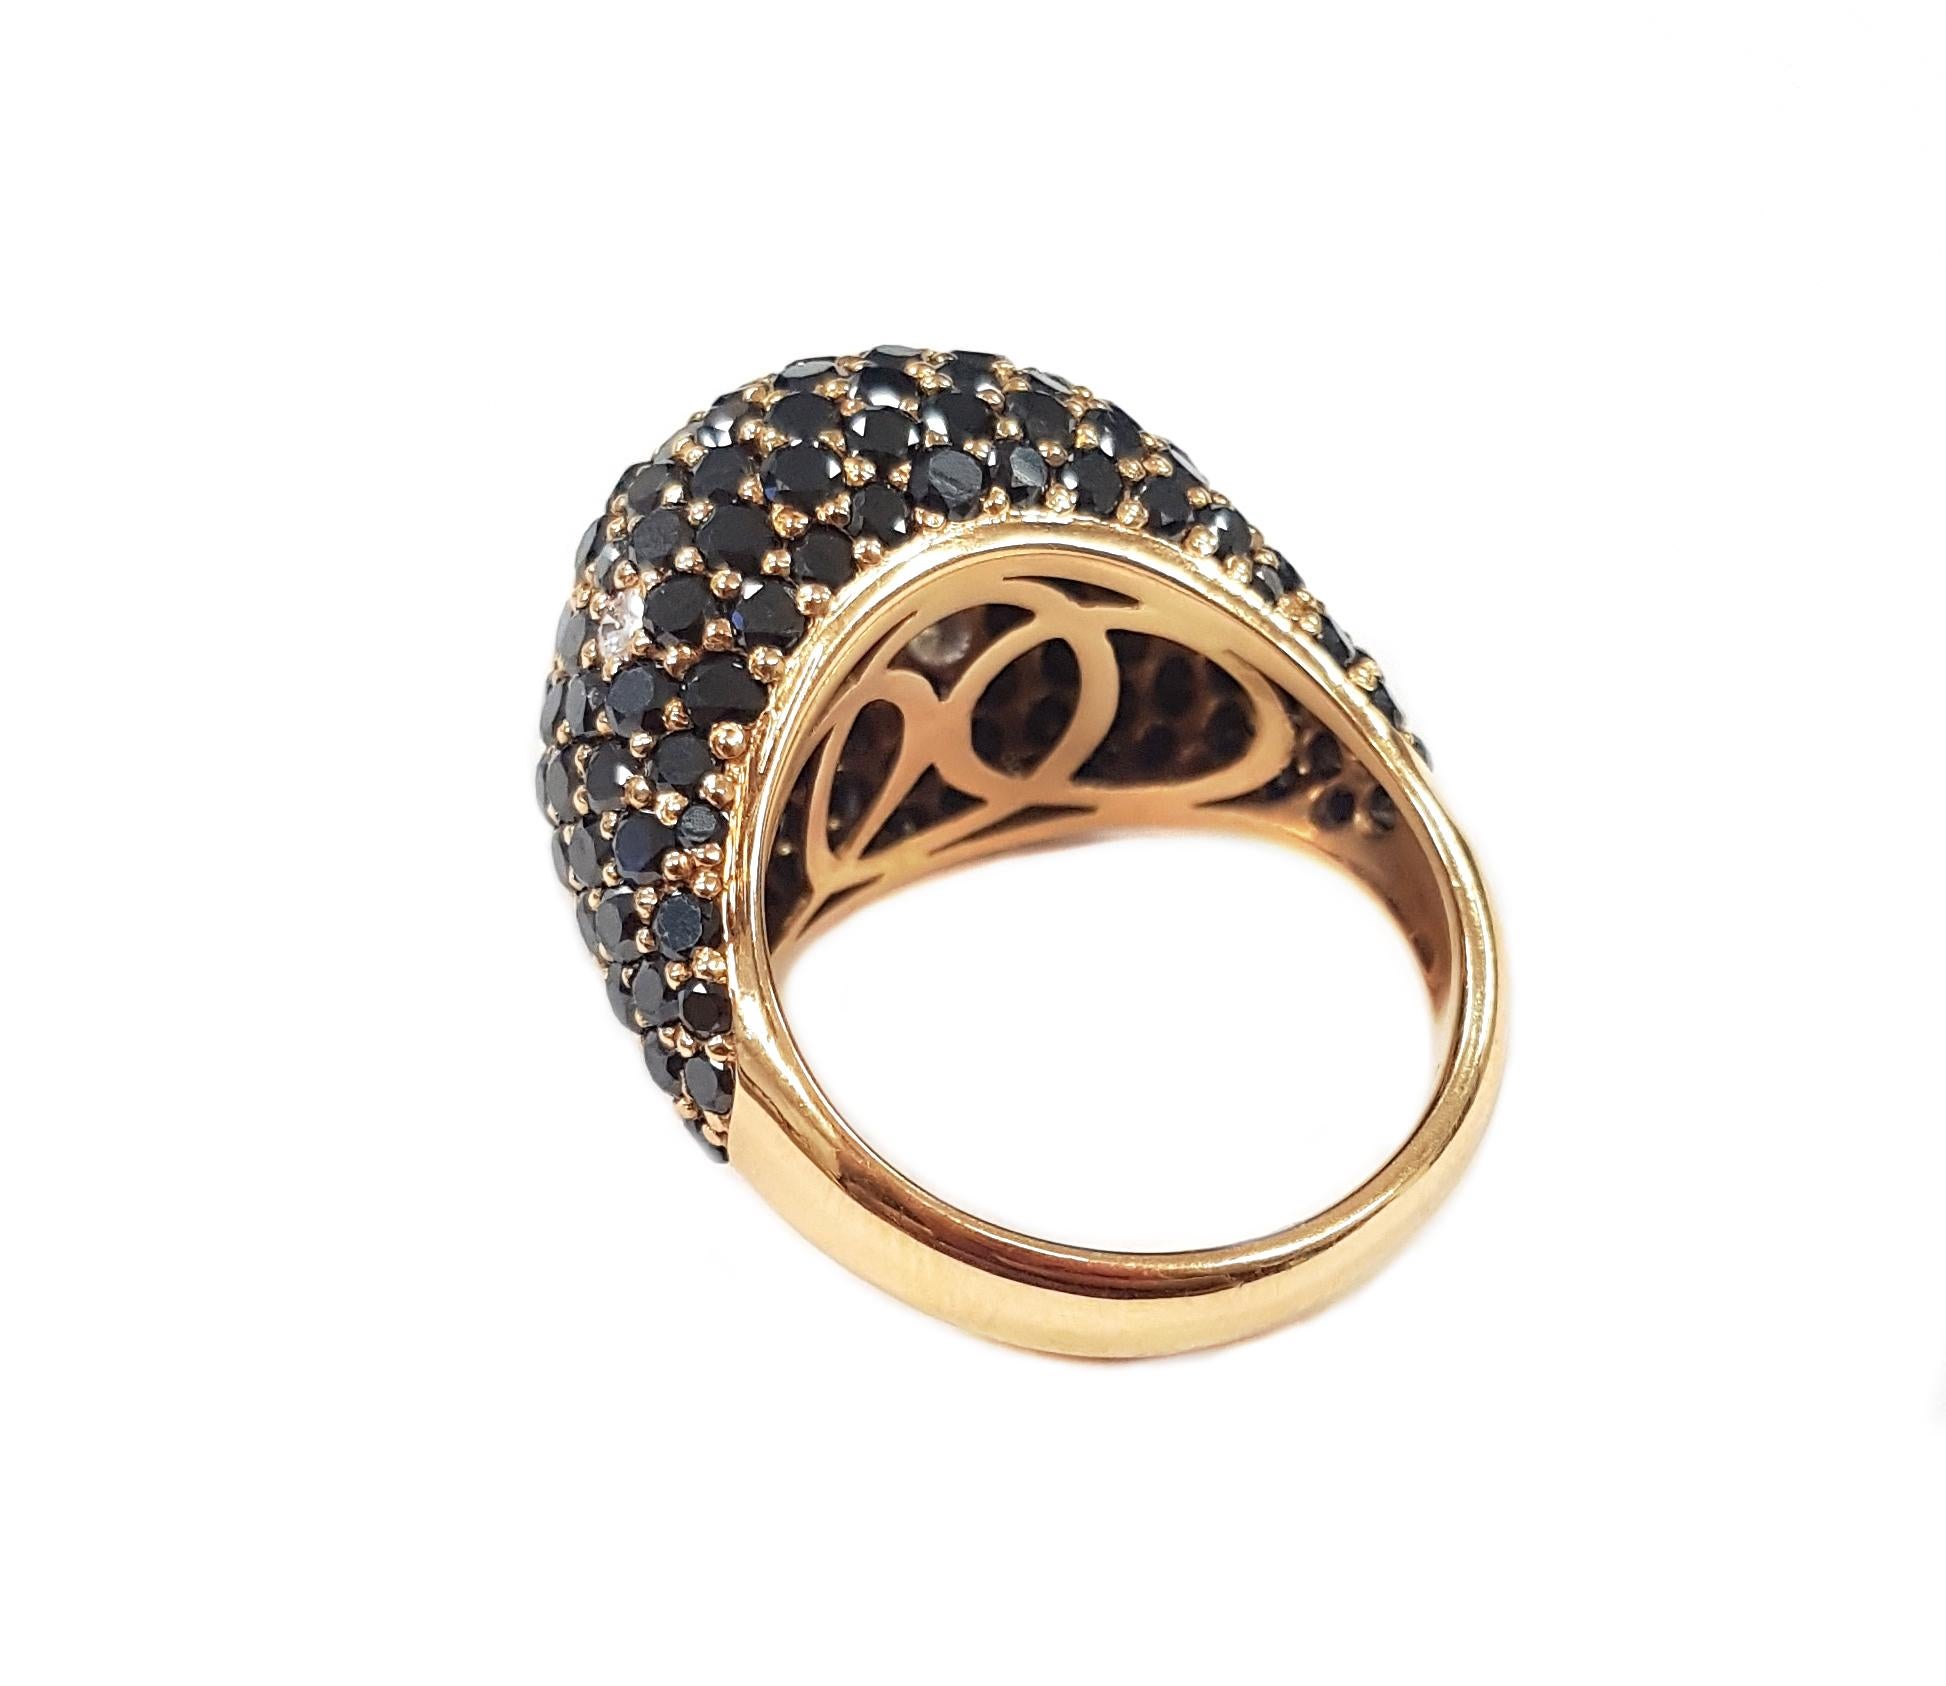 Contemporary 21st Century 18 Karat Rose Gold Diamond Art Deco Style Dome Cocktail Ring For Sale